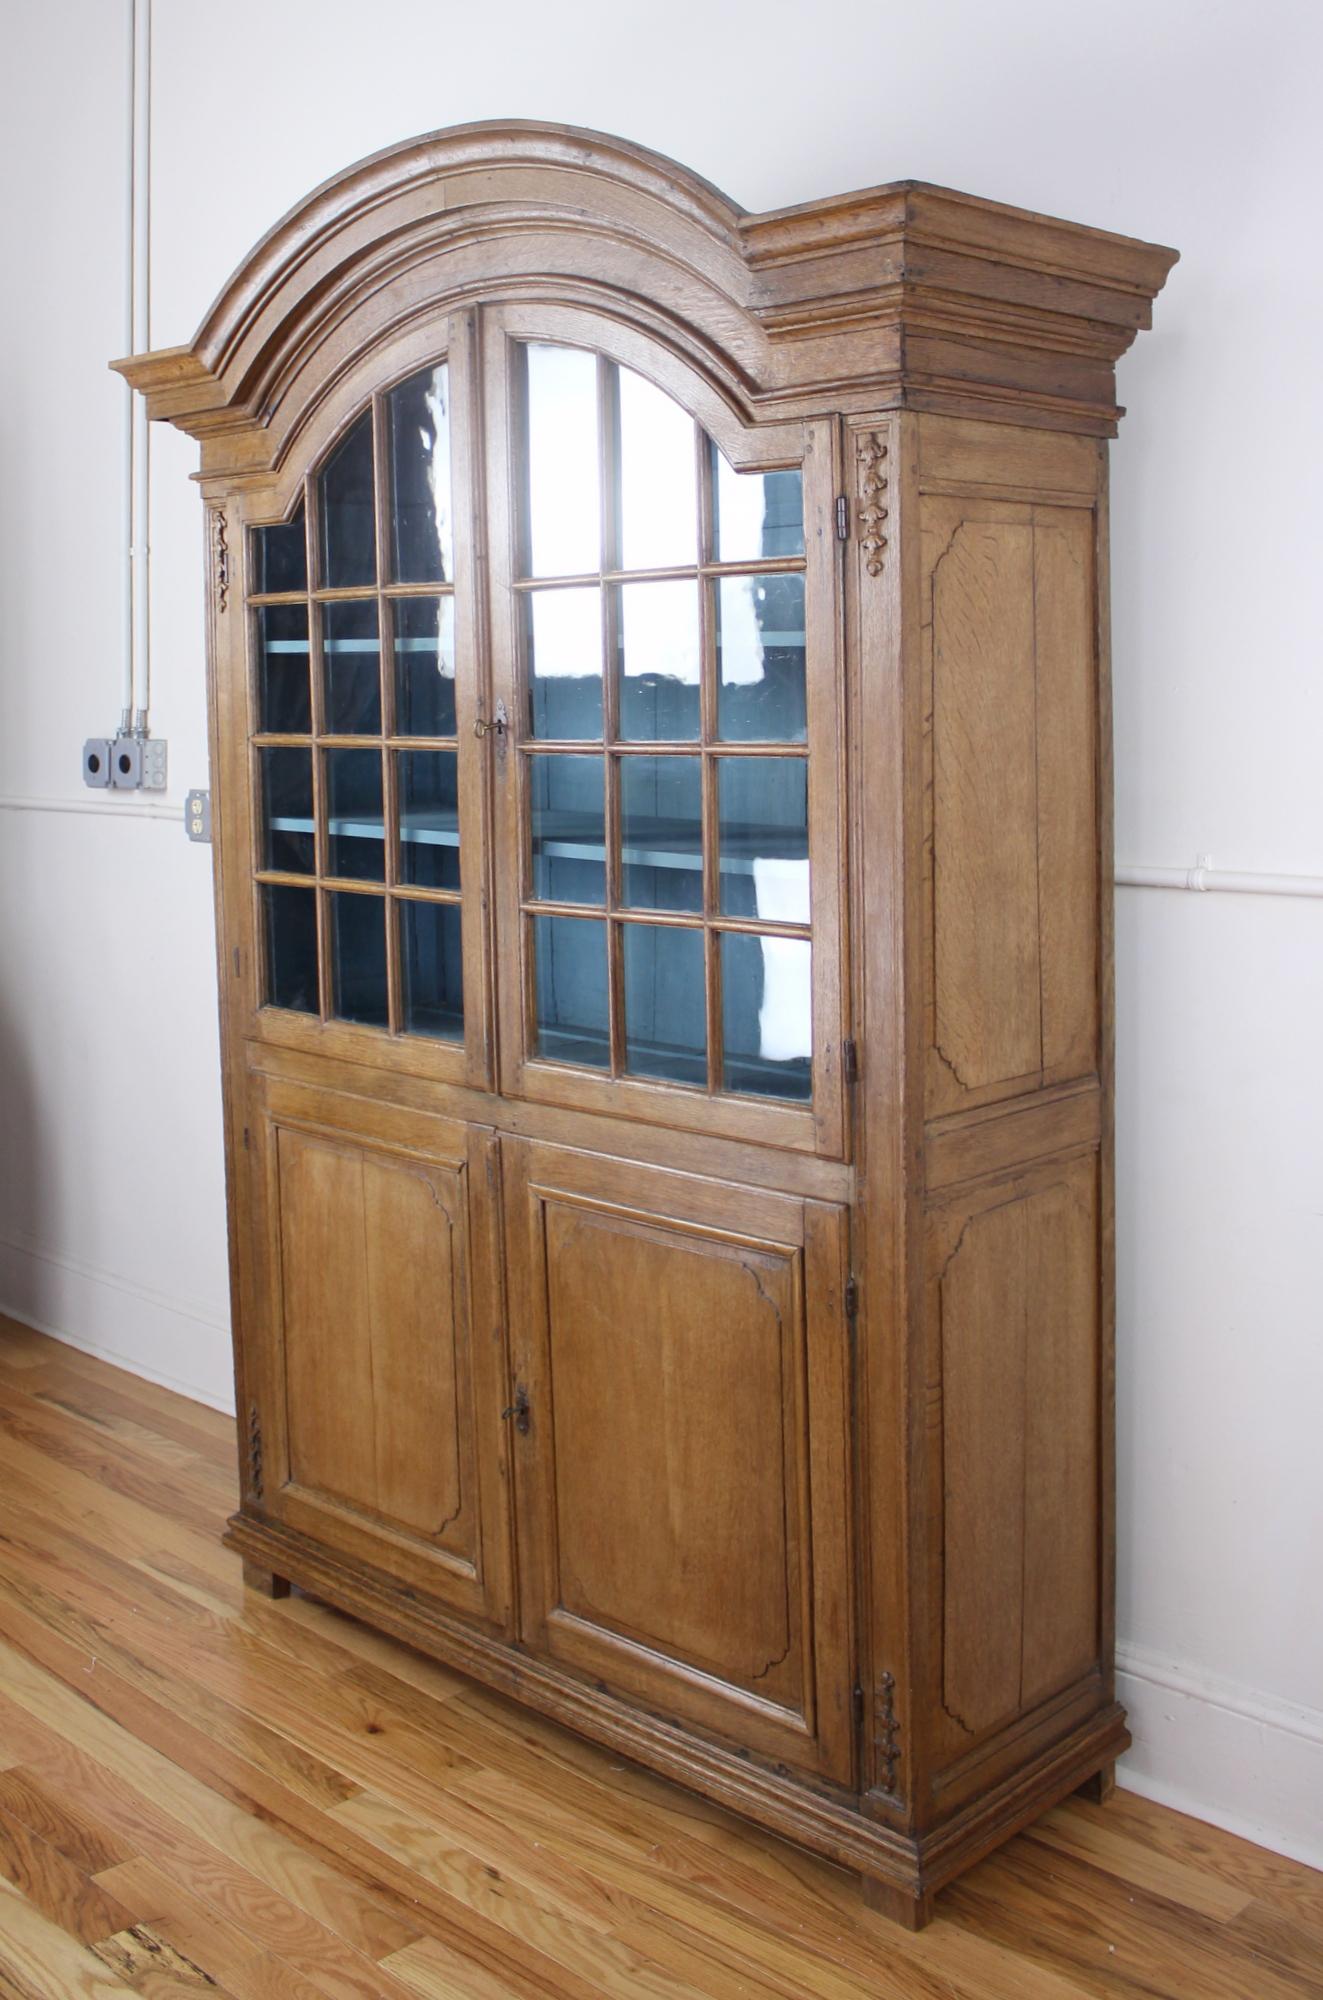 A spectacular early Dutch vitrine in polished oak. We believe this piece to be from delft, originally configured in the upper cabinet to display blue and white traditional delft porcelain. Now reconstructed for modern use. Newly painted blue